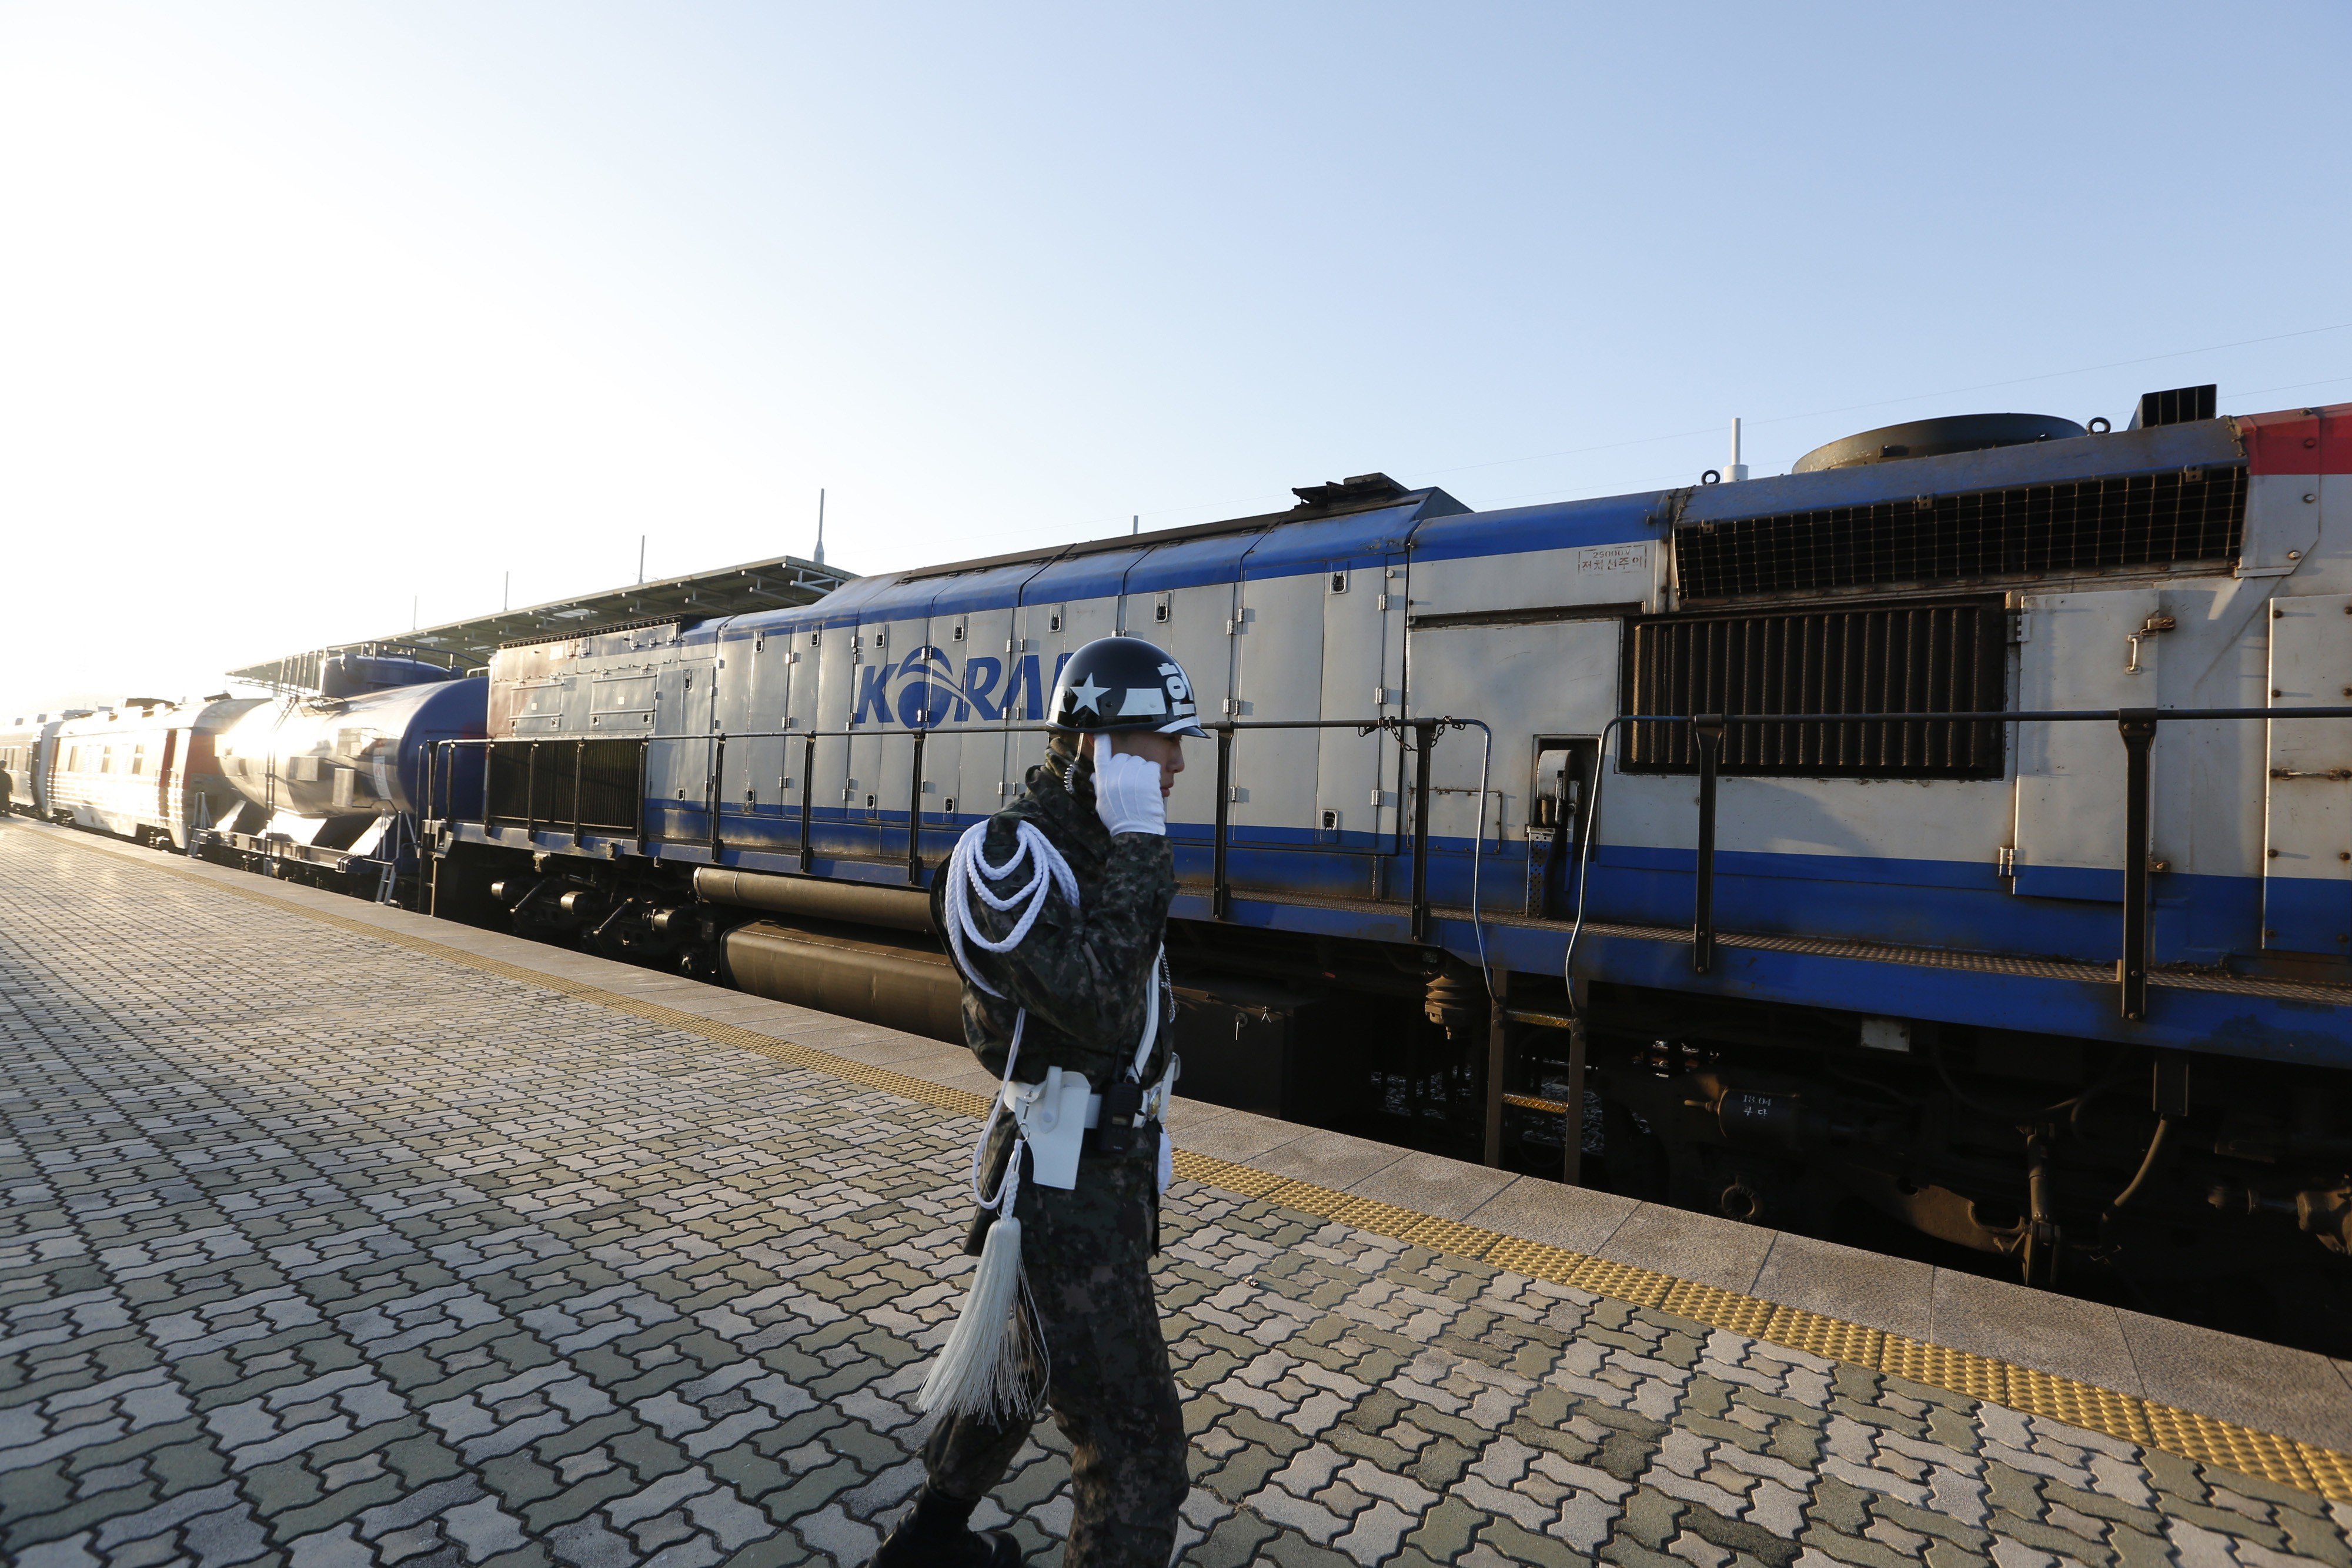 A South Korean army soldier stands next to a train before it crosses the border into North Korea. Photo: AP